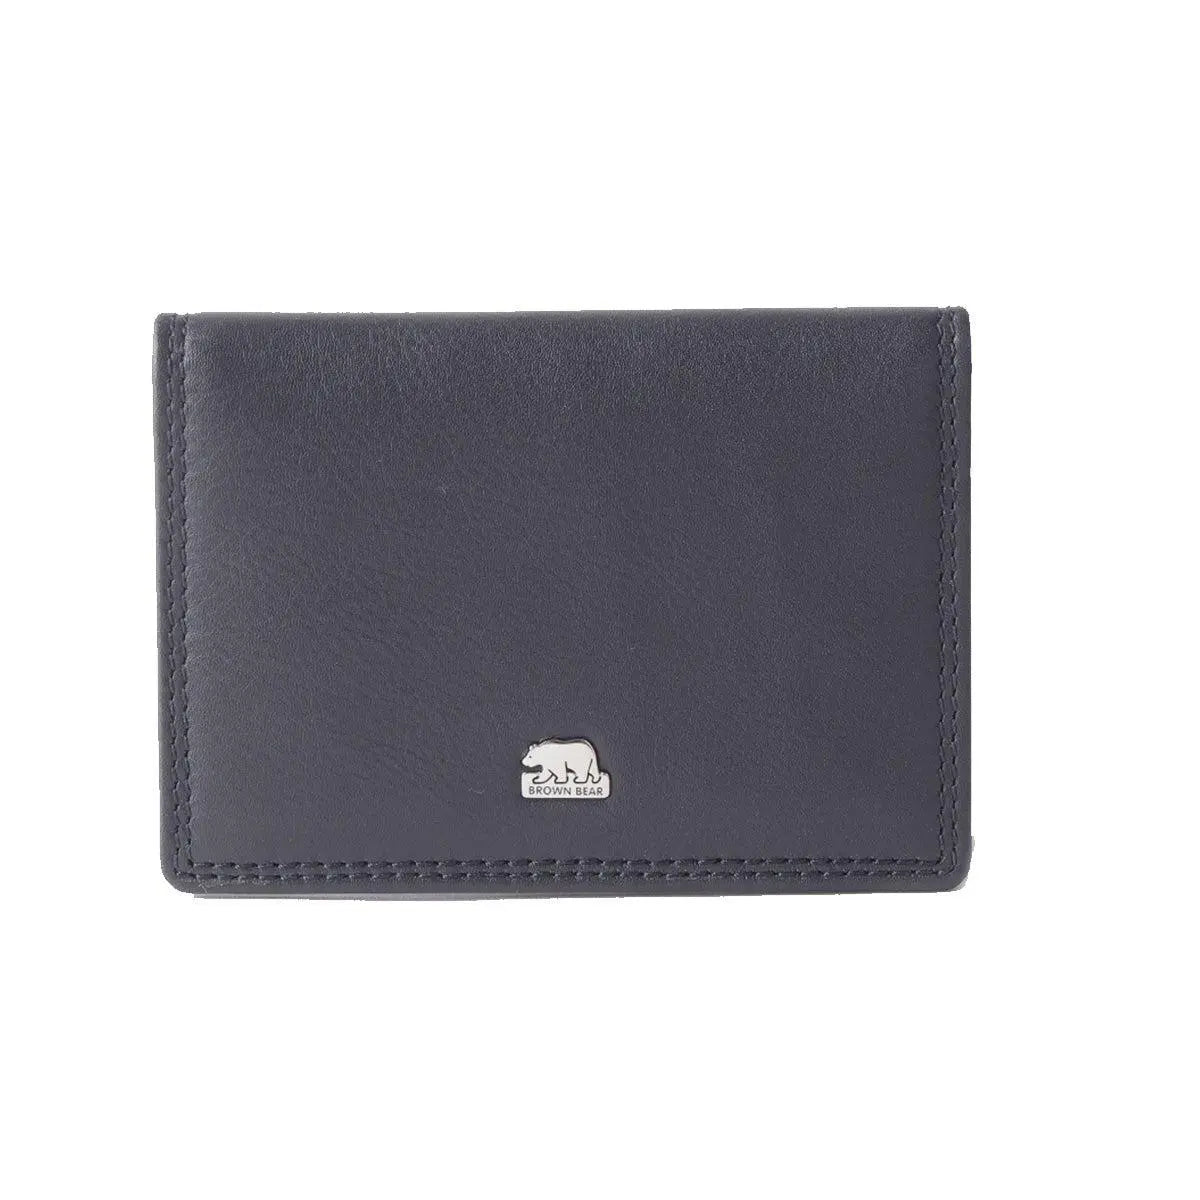 Multi piece Card Holder Wallet with Flap in Genuine Leather - Brown Bear